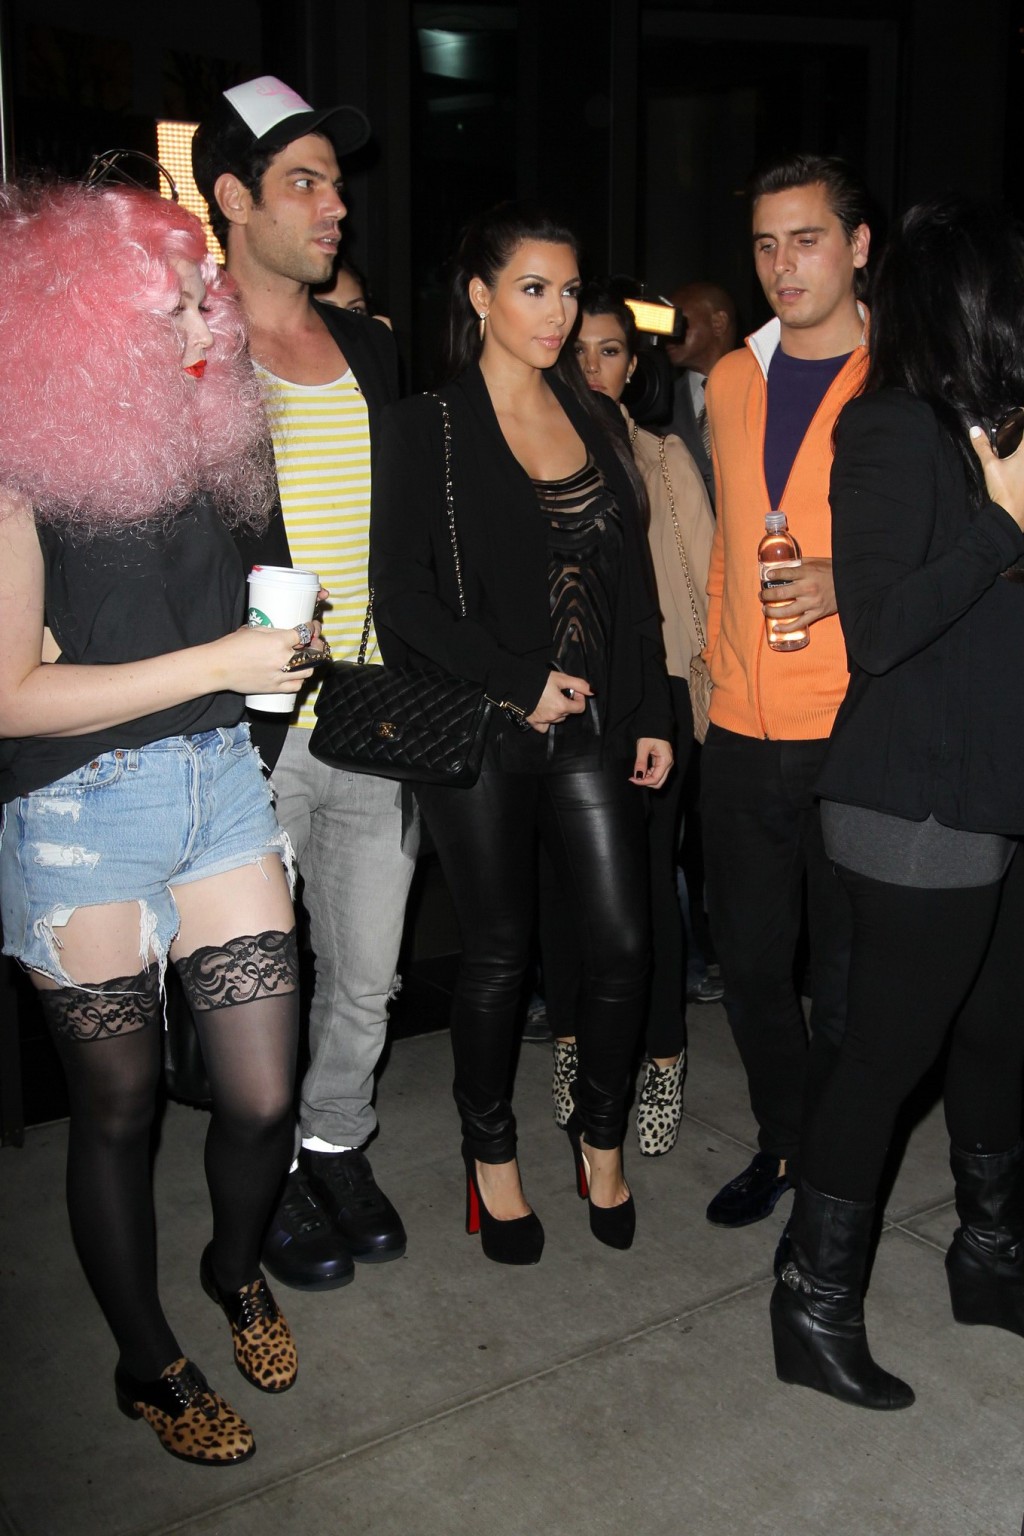 Kim Kardashian in slutty outfit heading to a bowling alley in NYC #75287264